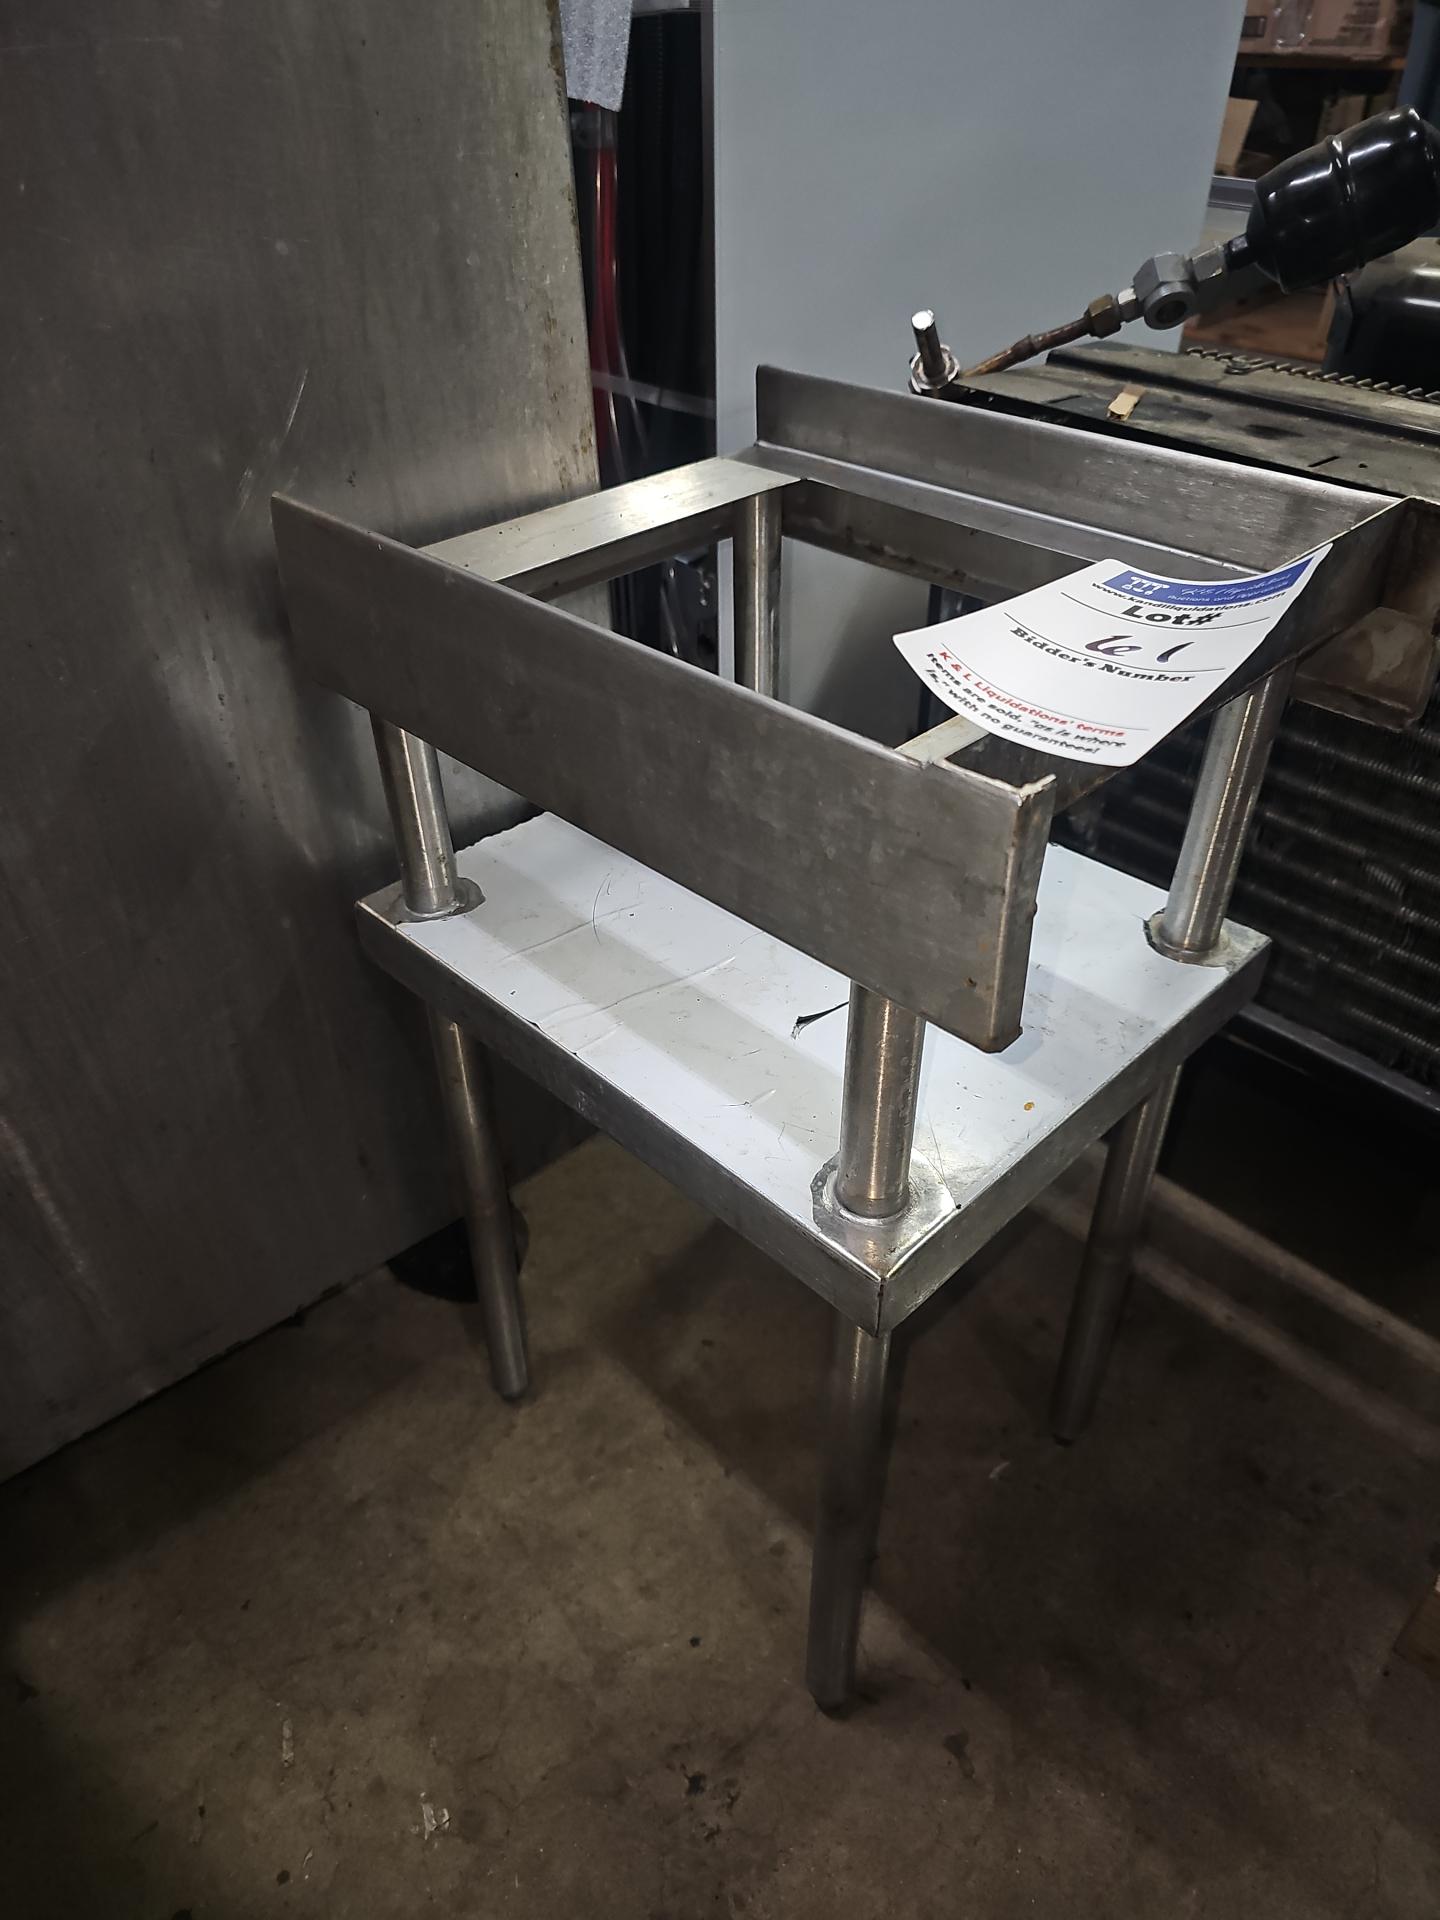 Stainless steel stand 11" x 14"